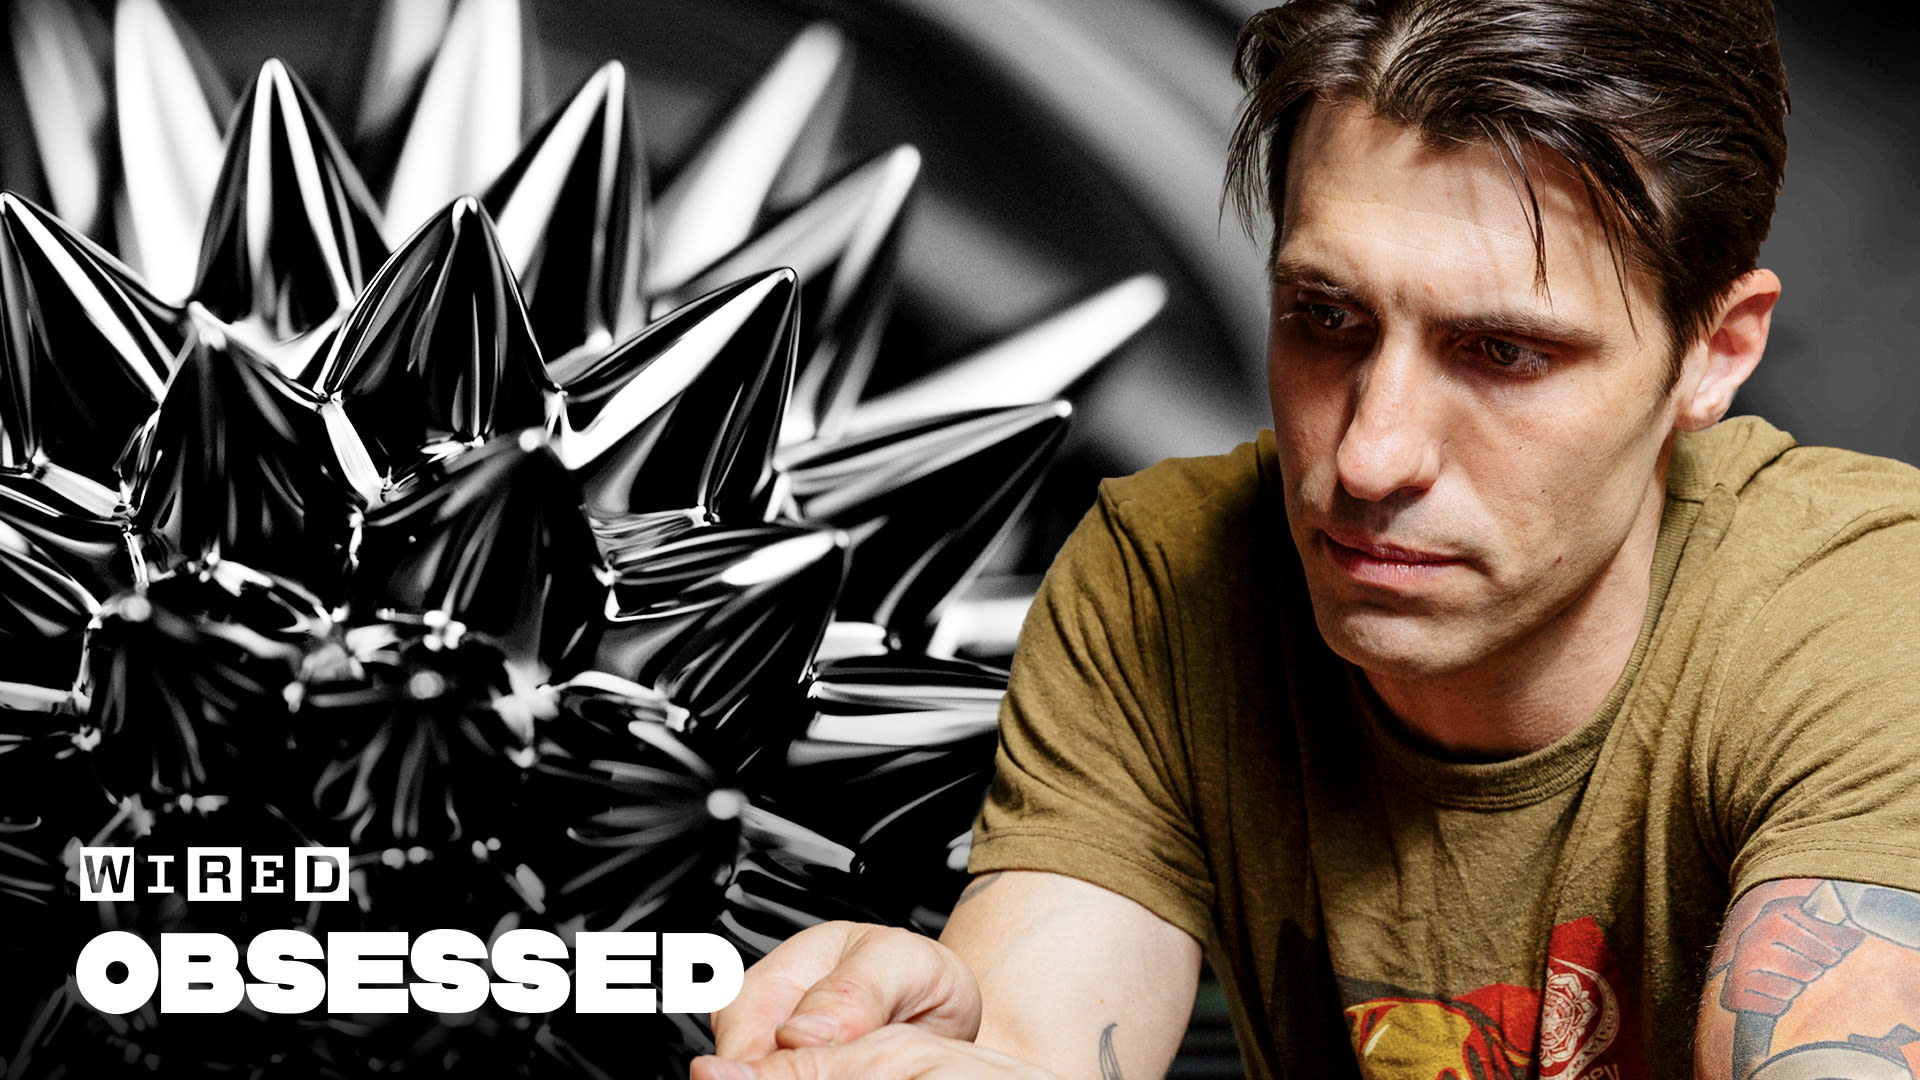 Watch How Magnetic Sculptures | Obsessed | WIRED